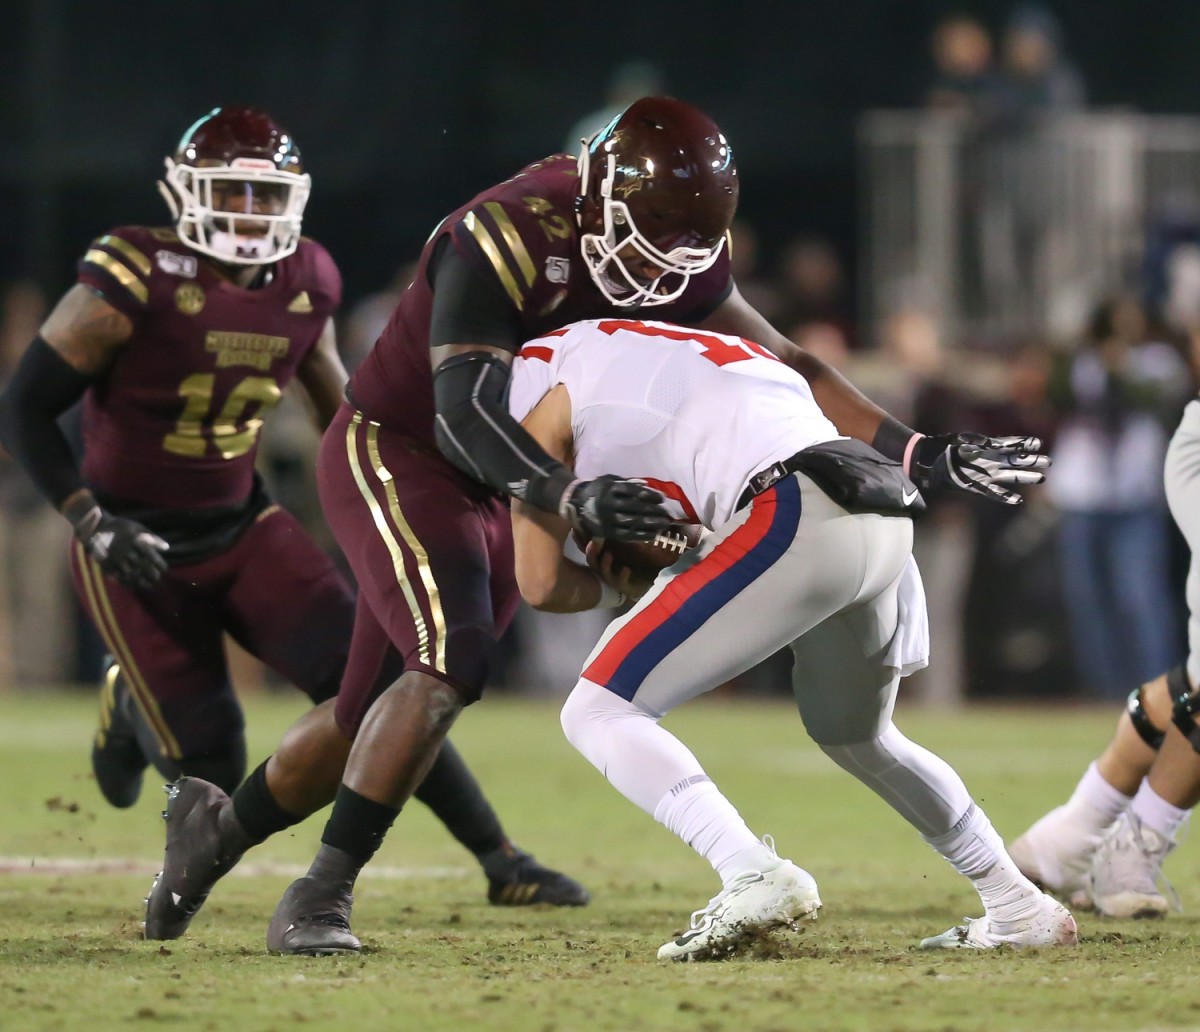 Mississippi State's Marquiss Spencer (42) tackles Ole Miss's John Rhys Plumlee (10). Mississippi State and Ole Miss played in the Egg Bowl on Thursday, November 28, 2019 at Davis Wade Stadium in Starkville. 2019 Egg Bowl